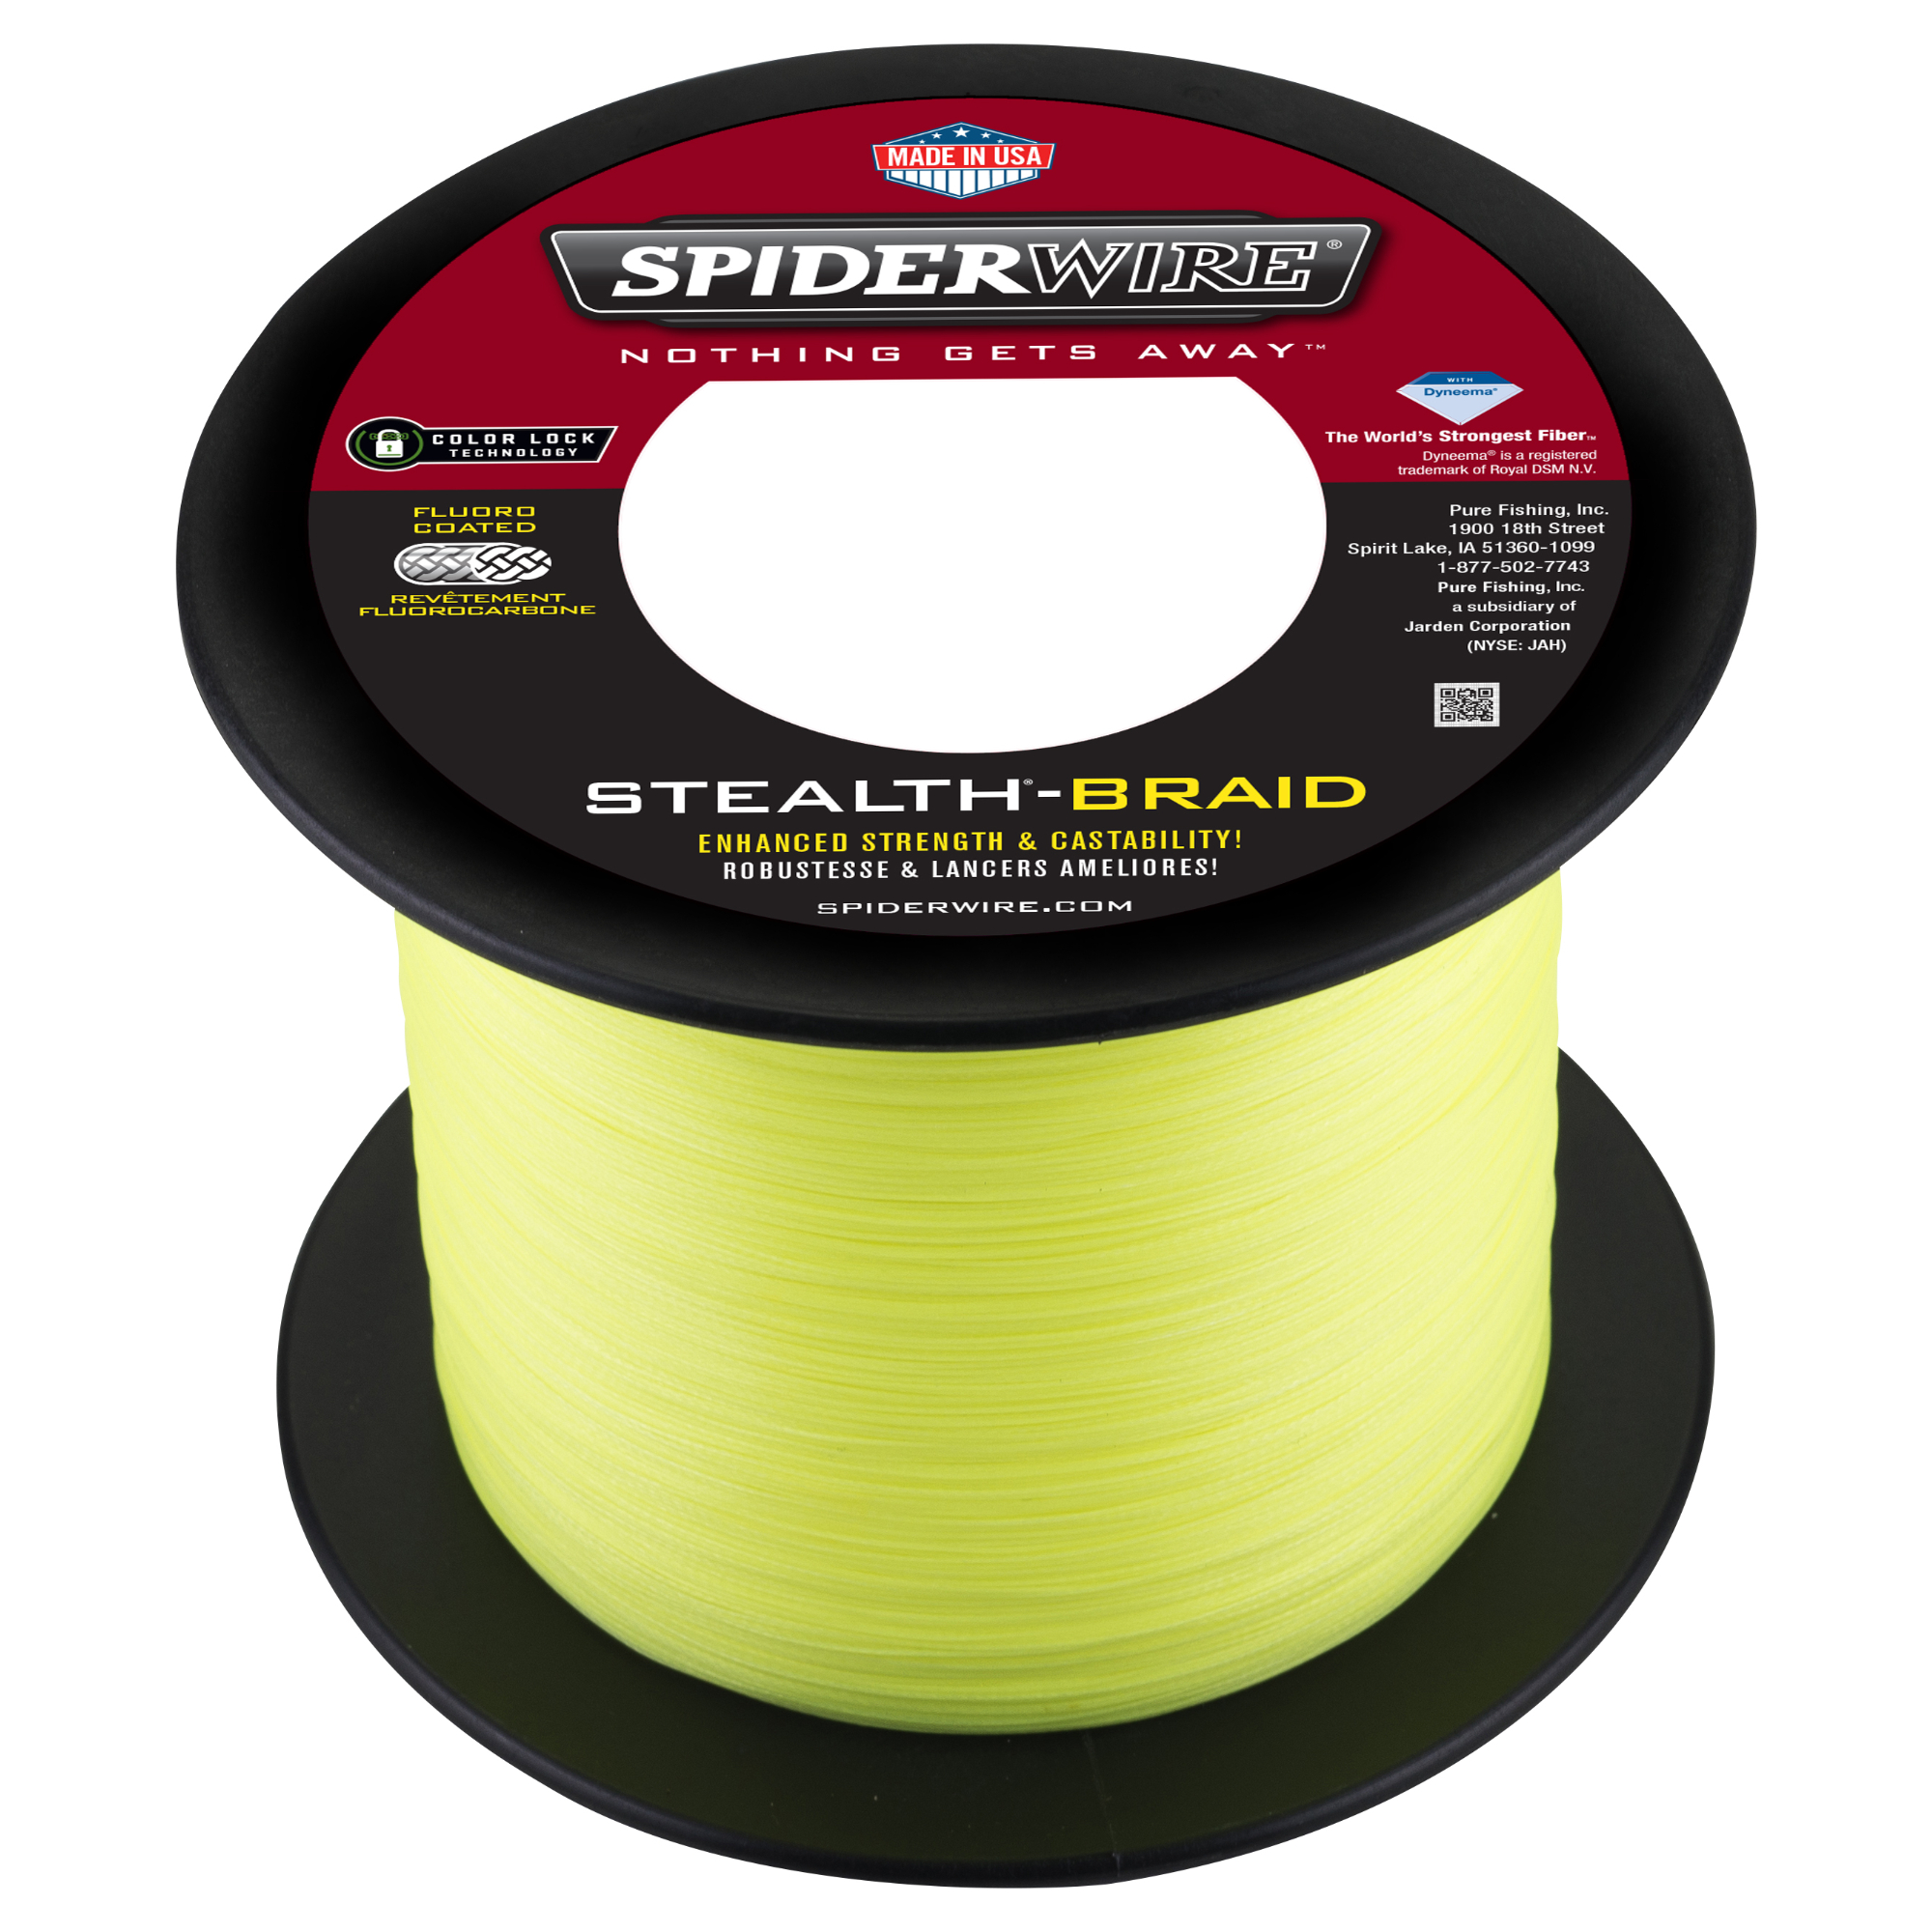 https://www.precisionfishing.com/img/products/032/032%20Spiderwire%20Stealth%20Fishing%20Line%201500%20Yds%20-%20Hi-Vis%20Yellow.jpg